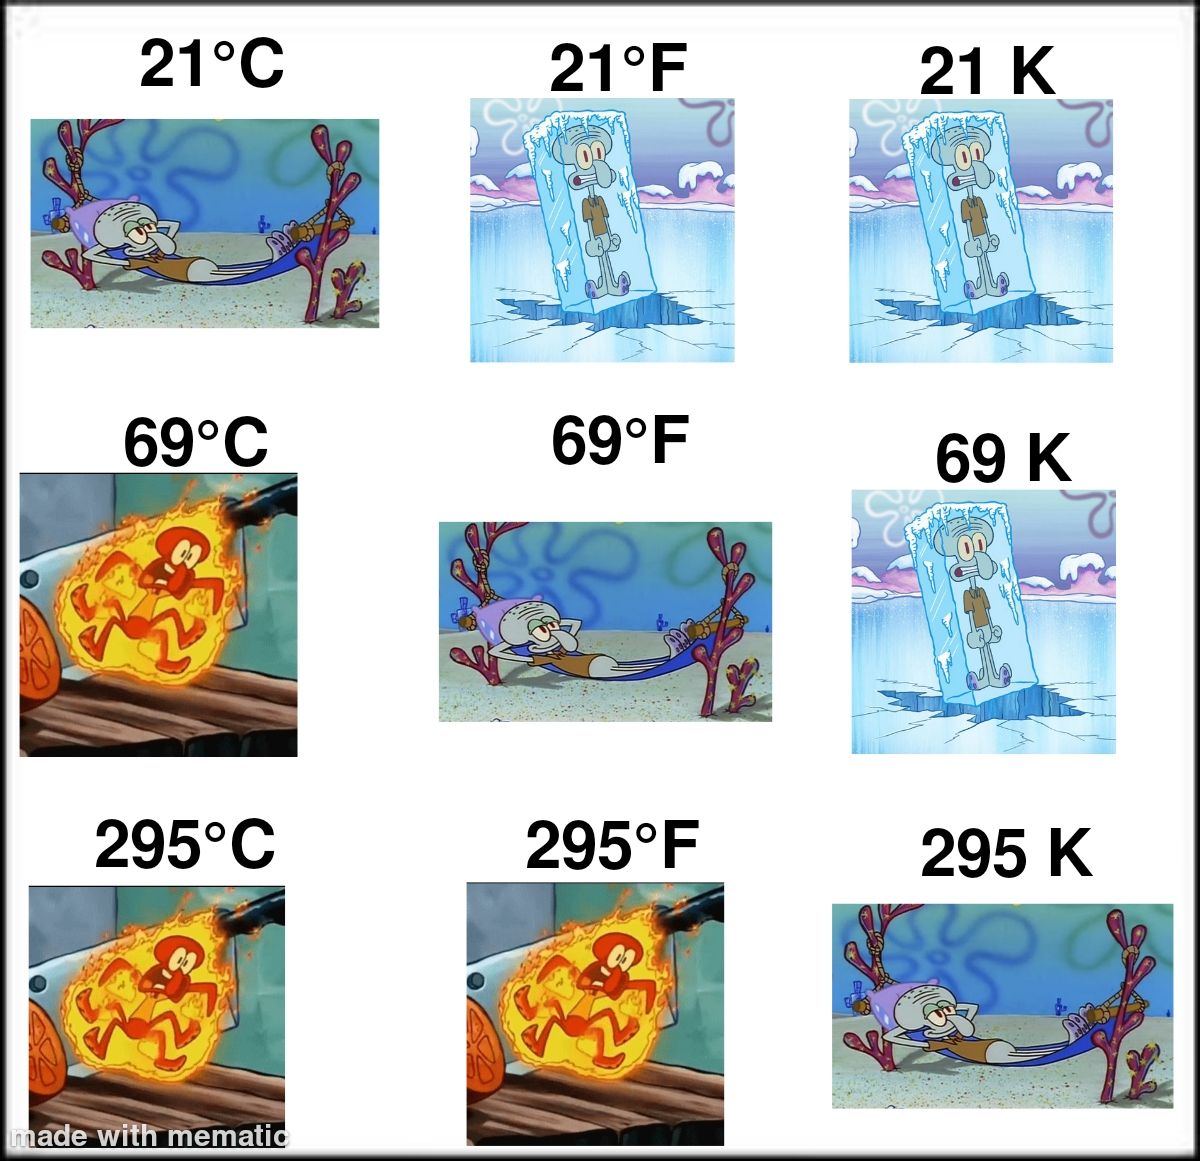 temperature explained by squidward